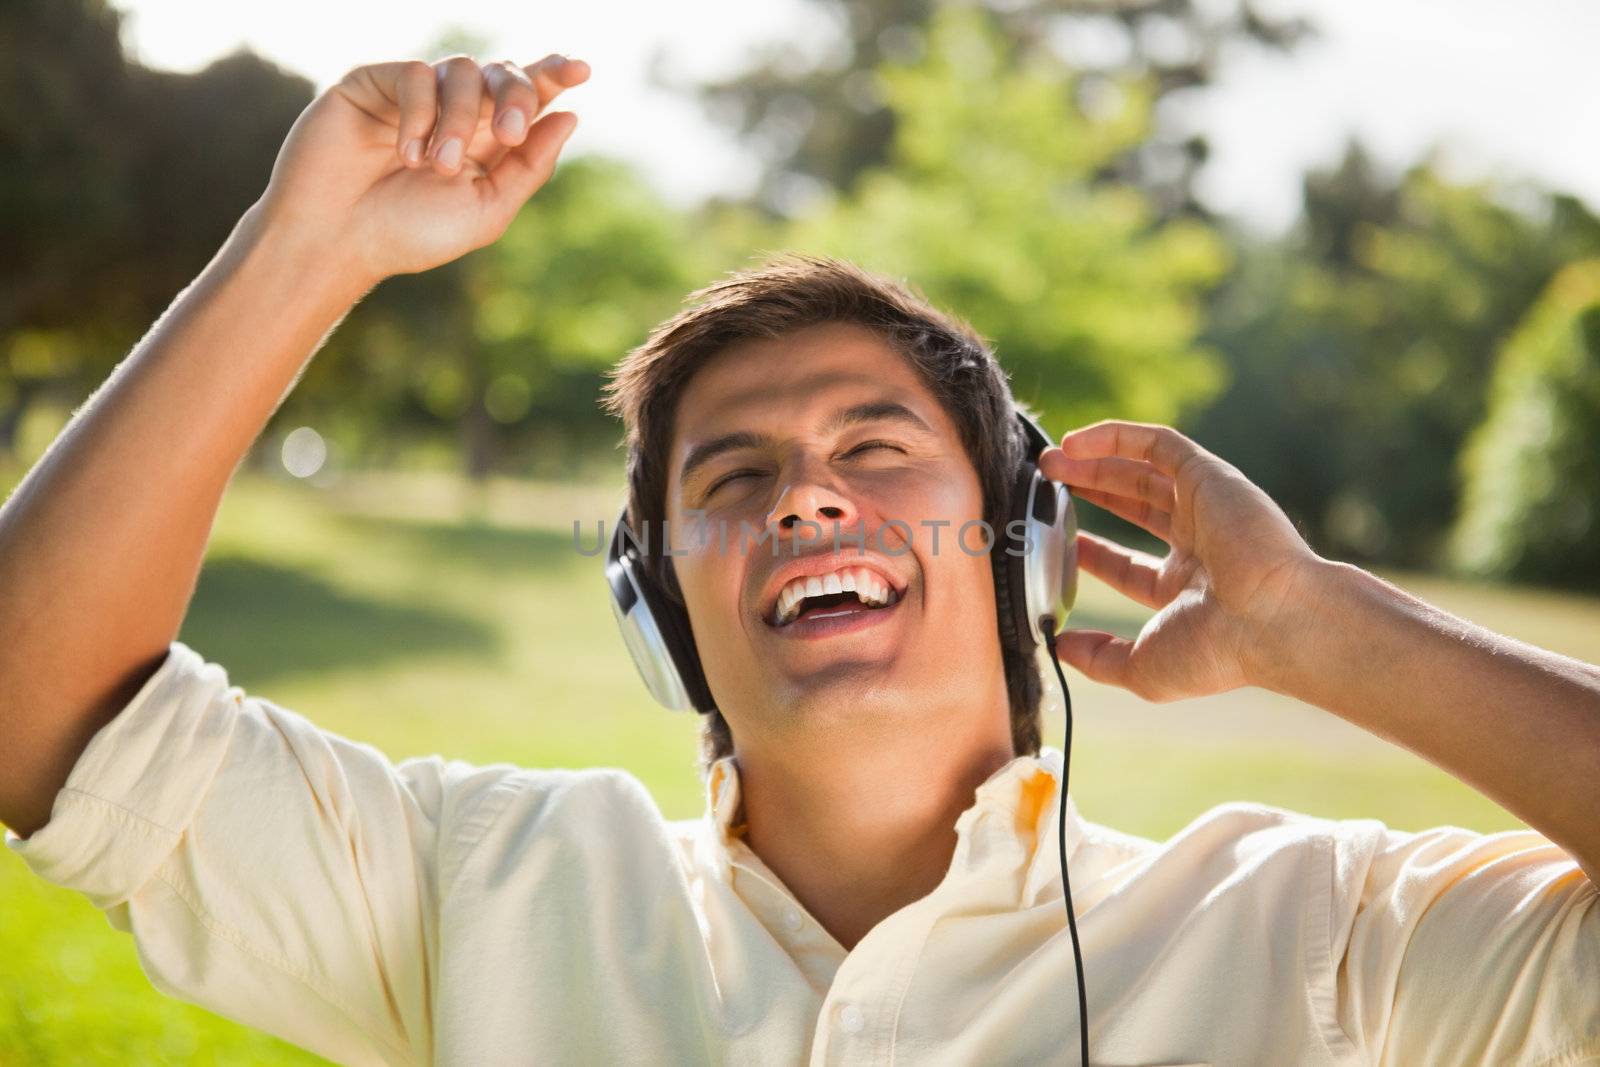 Man raising his arms while using headphones to sing along to mus by Wavebreakmedia